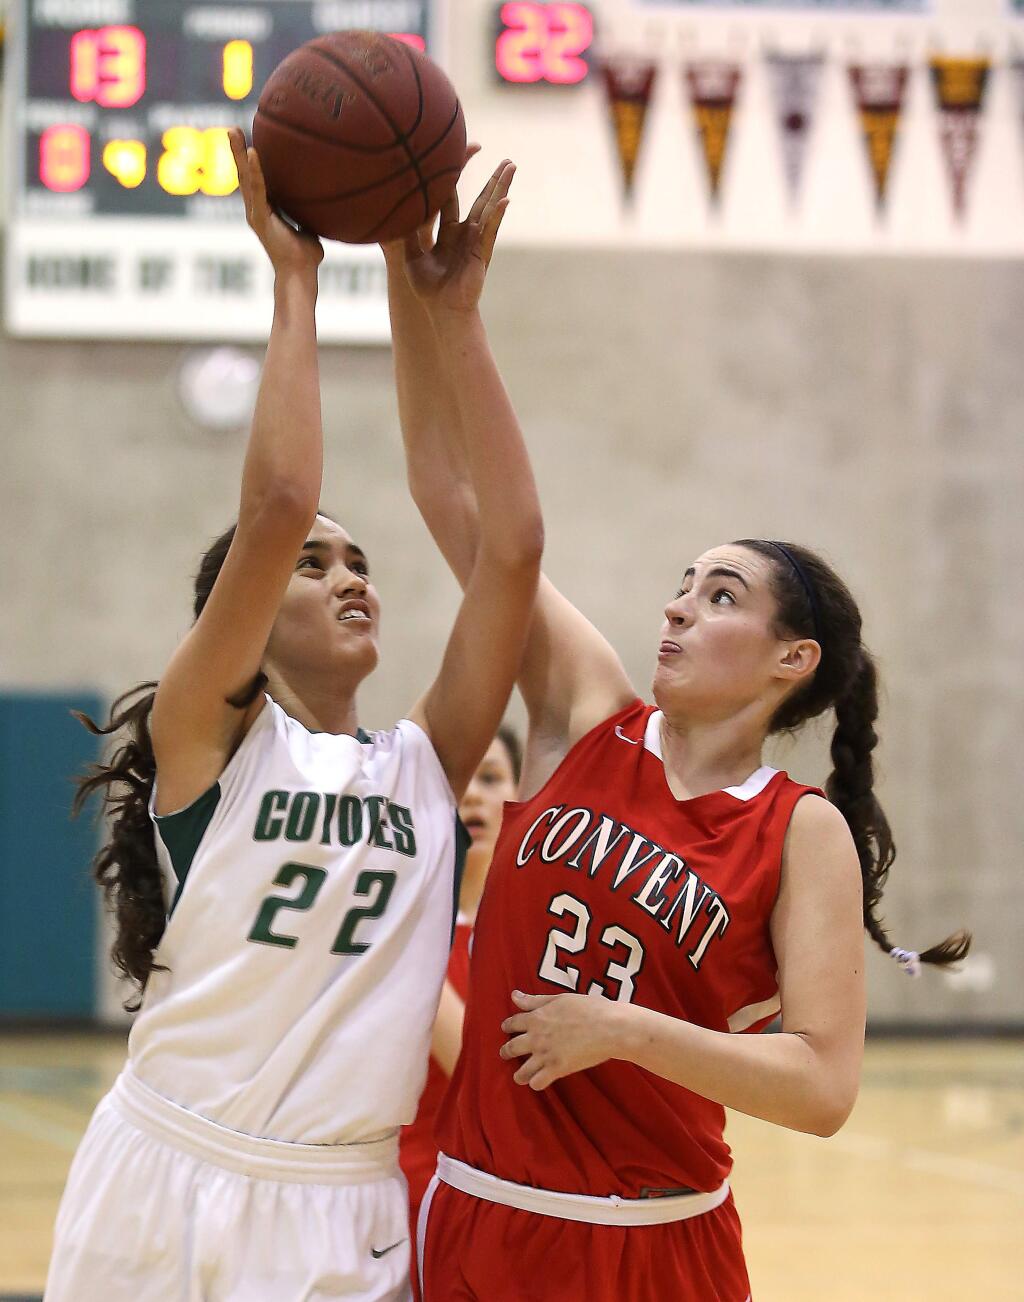 Sonoma Academy's Clara Spars goes up for a shot as Convent of Sacred Heart's Ariana Abdulmassih defends during the game held at Sonoma Academy, Wednesday, February 25, 2015. (CRISTA JEREMIASON / The Press Democrat)